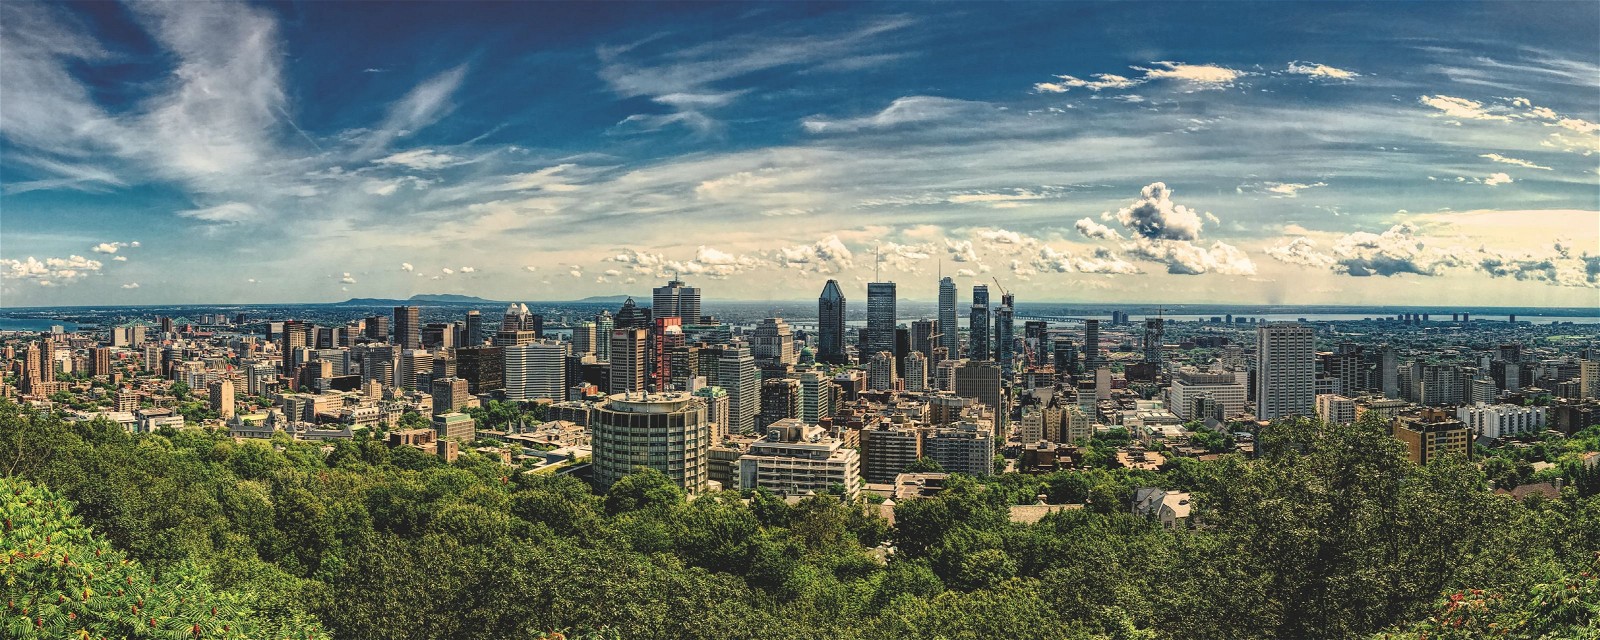 Montreal is a vibrant city located in the province of Quebec. May is a great time to visit, as the weather is mild and the city comes alive with festivals and events.